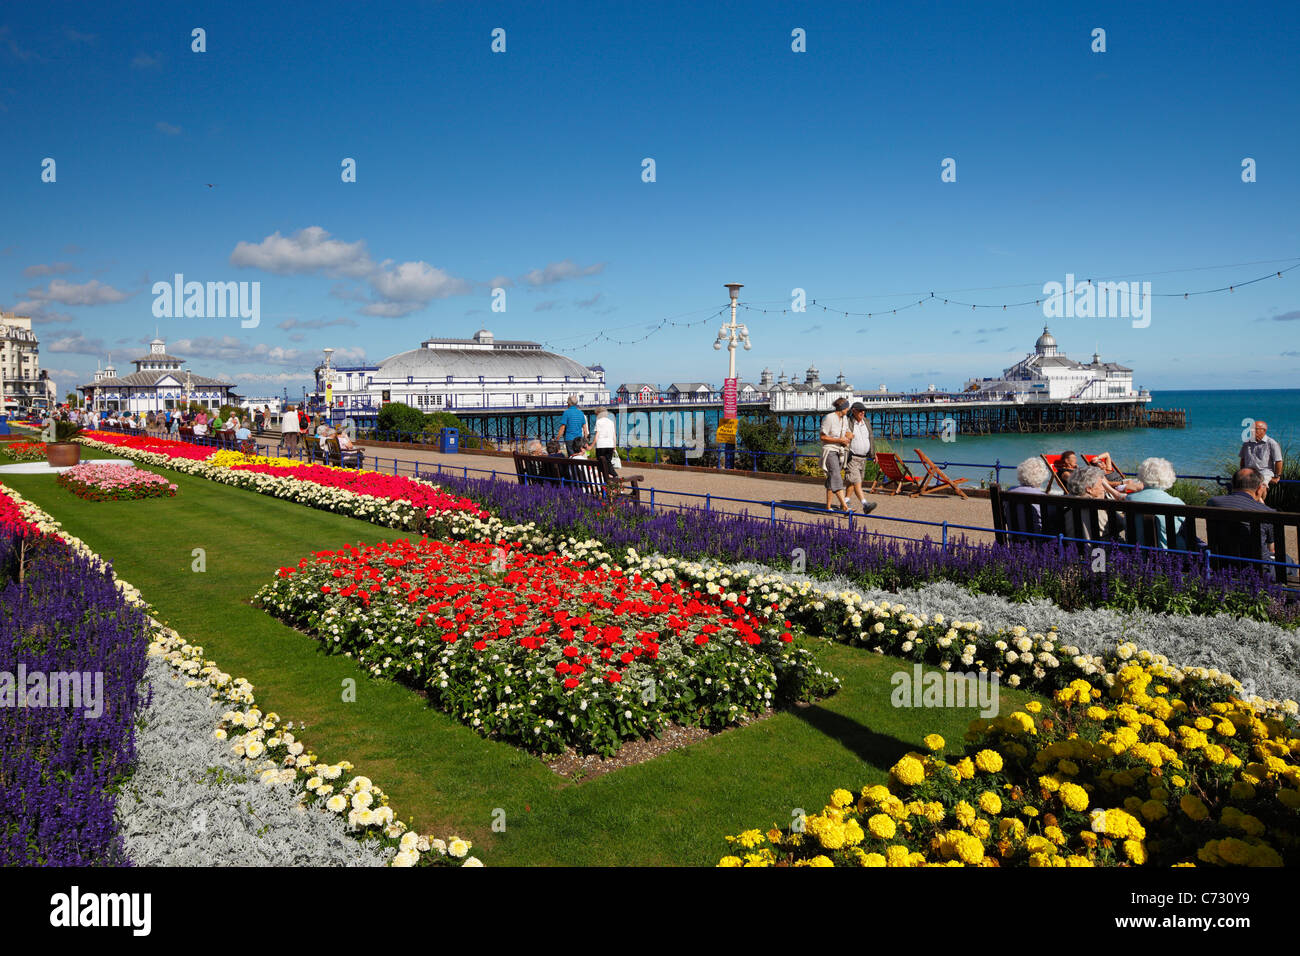 Eastbourne seafront. Stock Photo